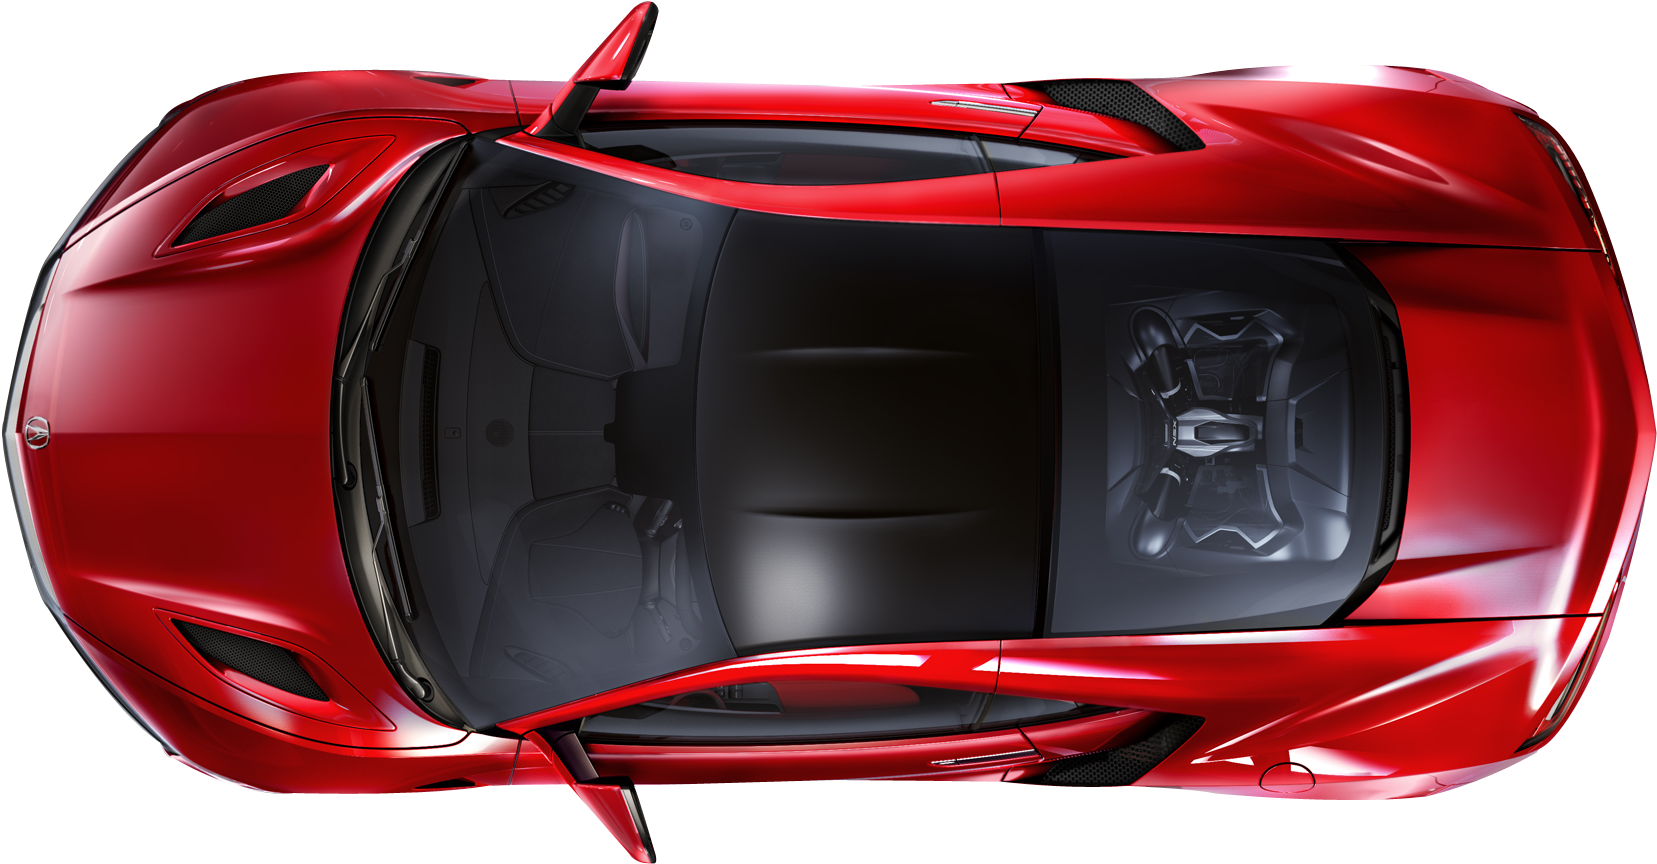 A Top View Of A Red Sports Car